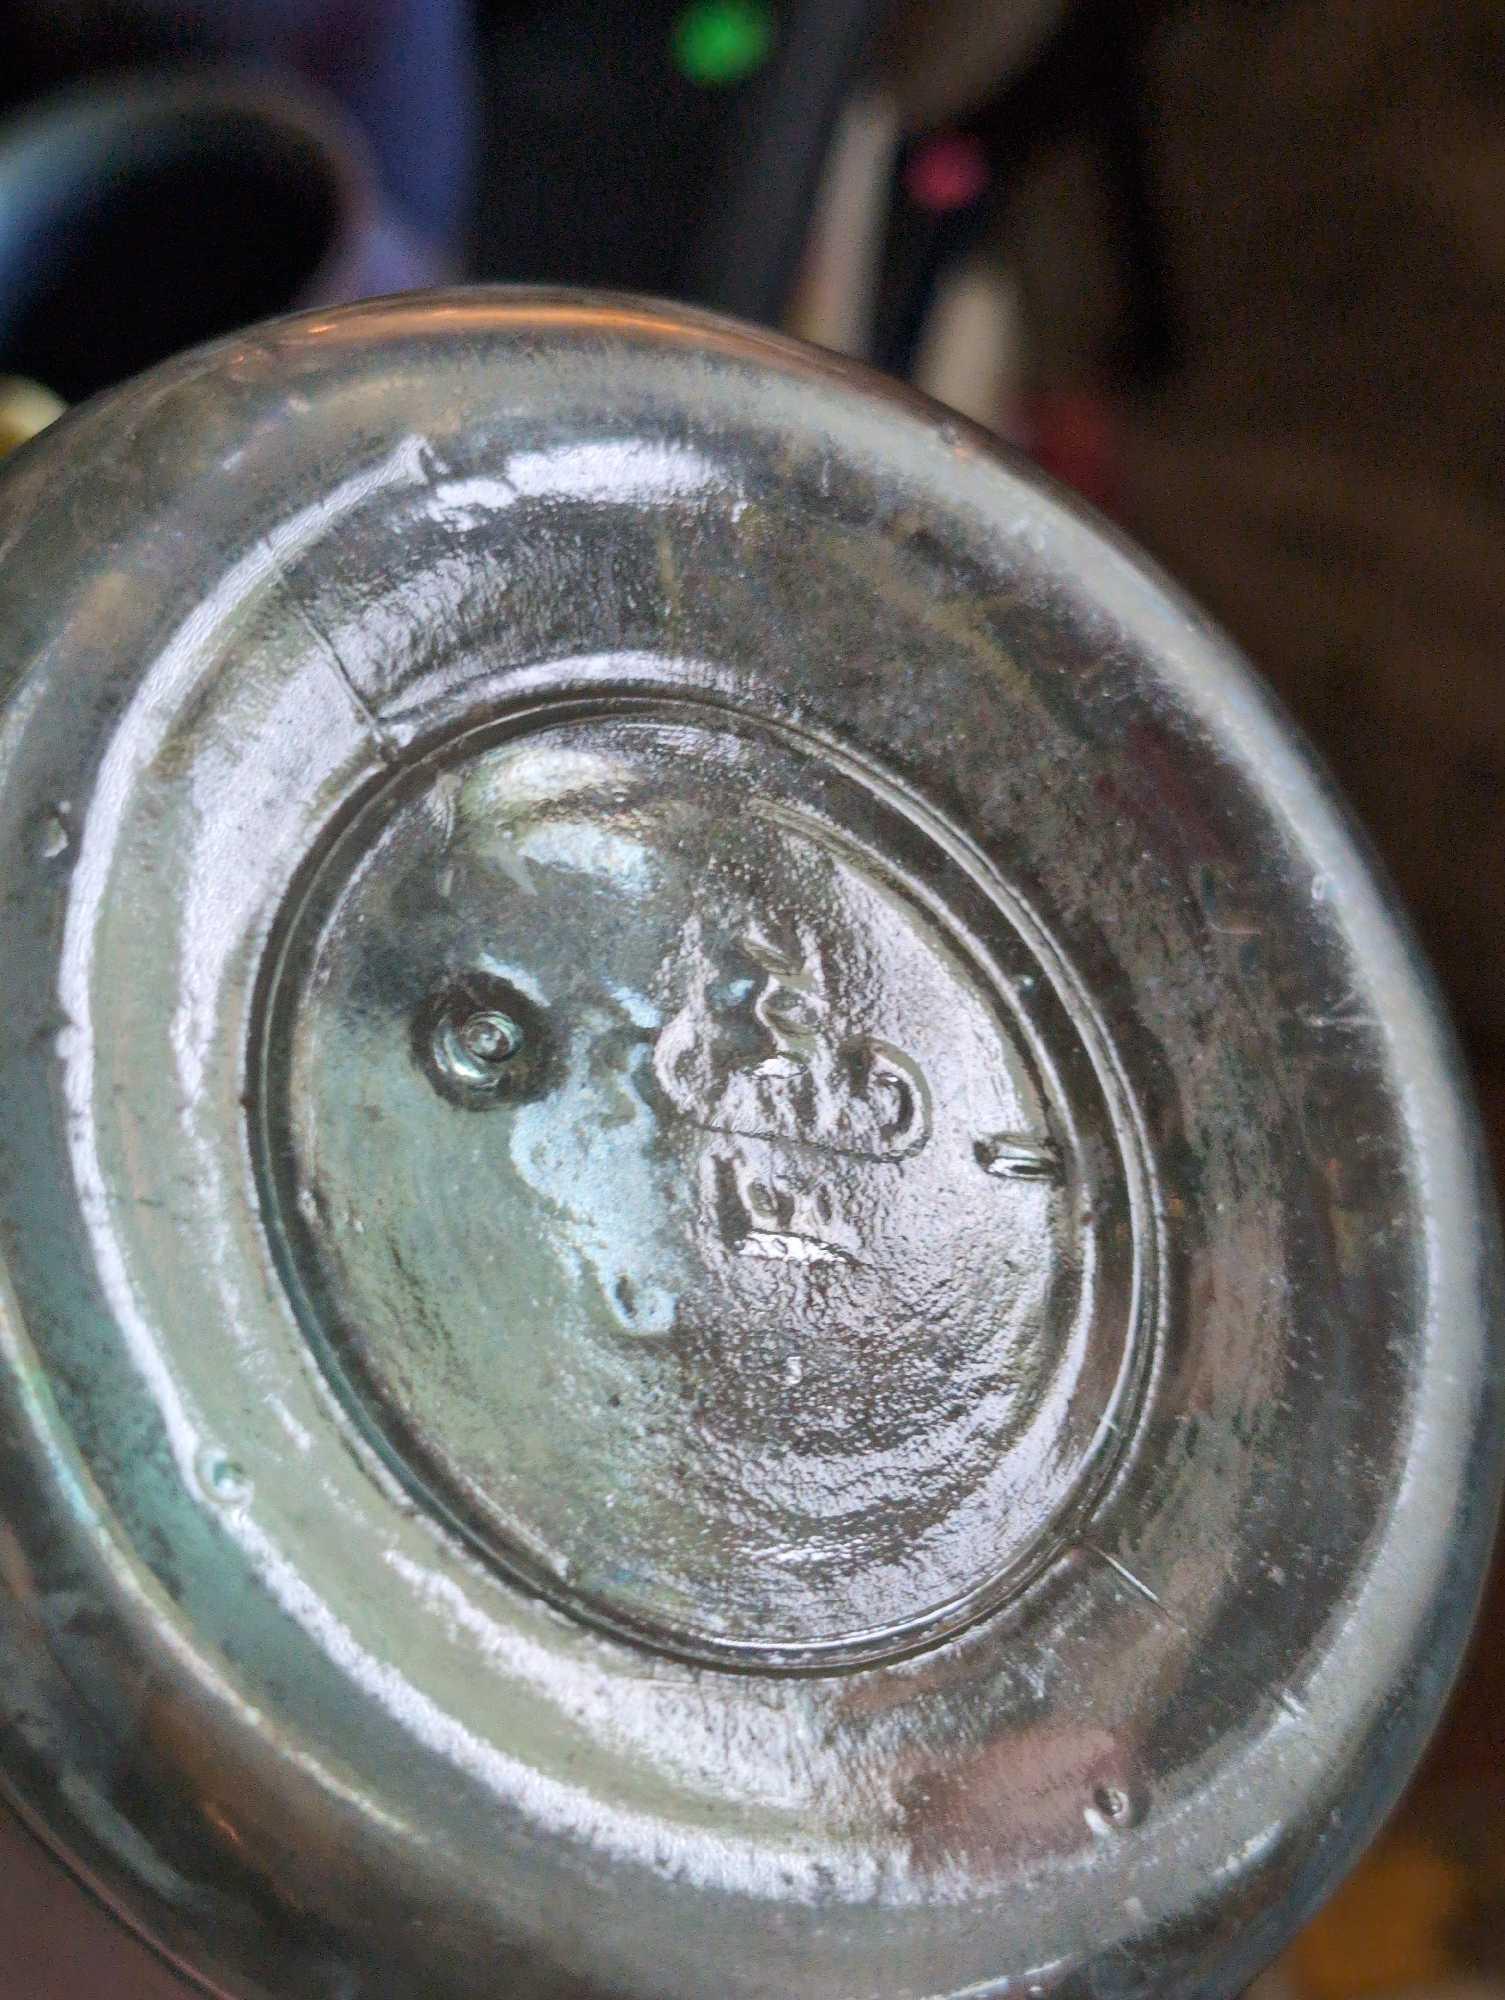 (LR) ANTIQUE BUFFALO GLASS WATER BOTTLE. READS "MINERAL SPRINGS NATURE MATERIA MEDICA WATER".